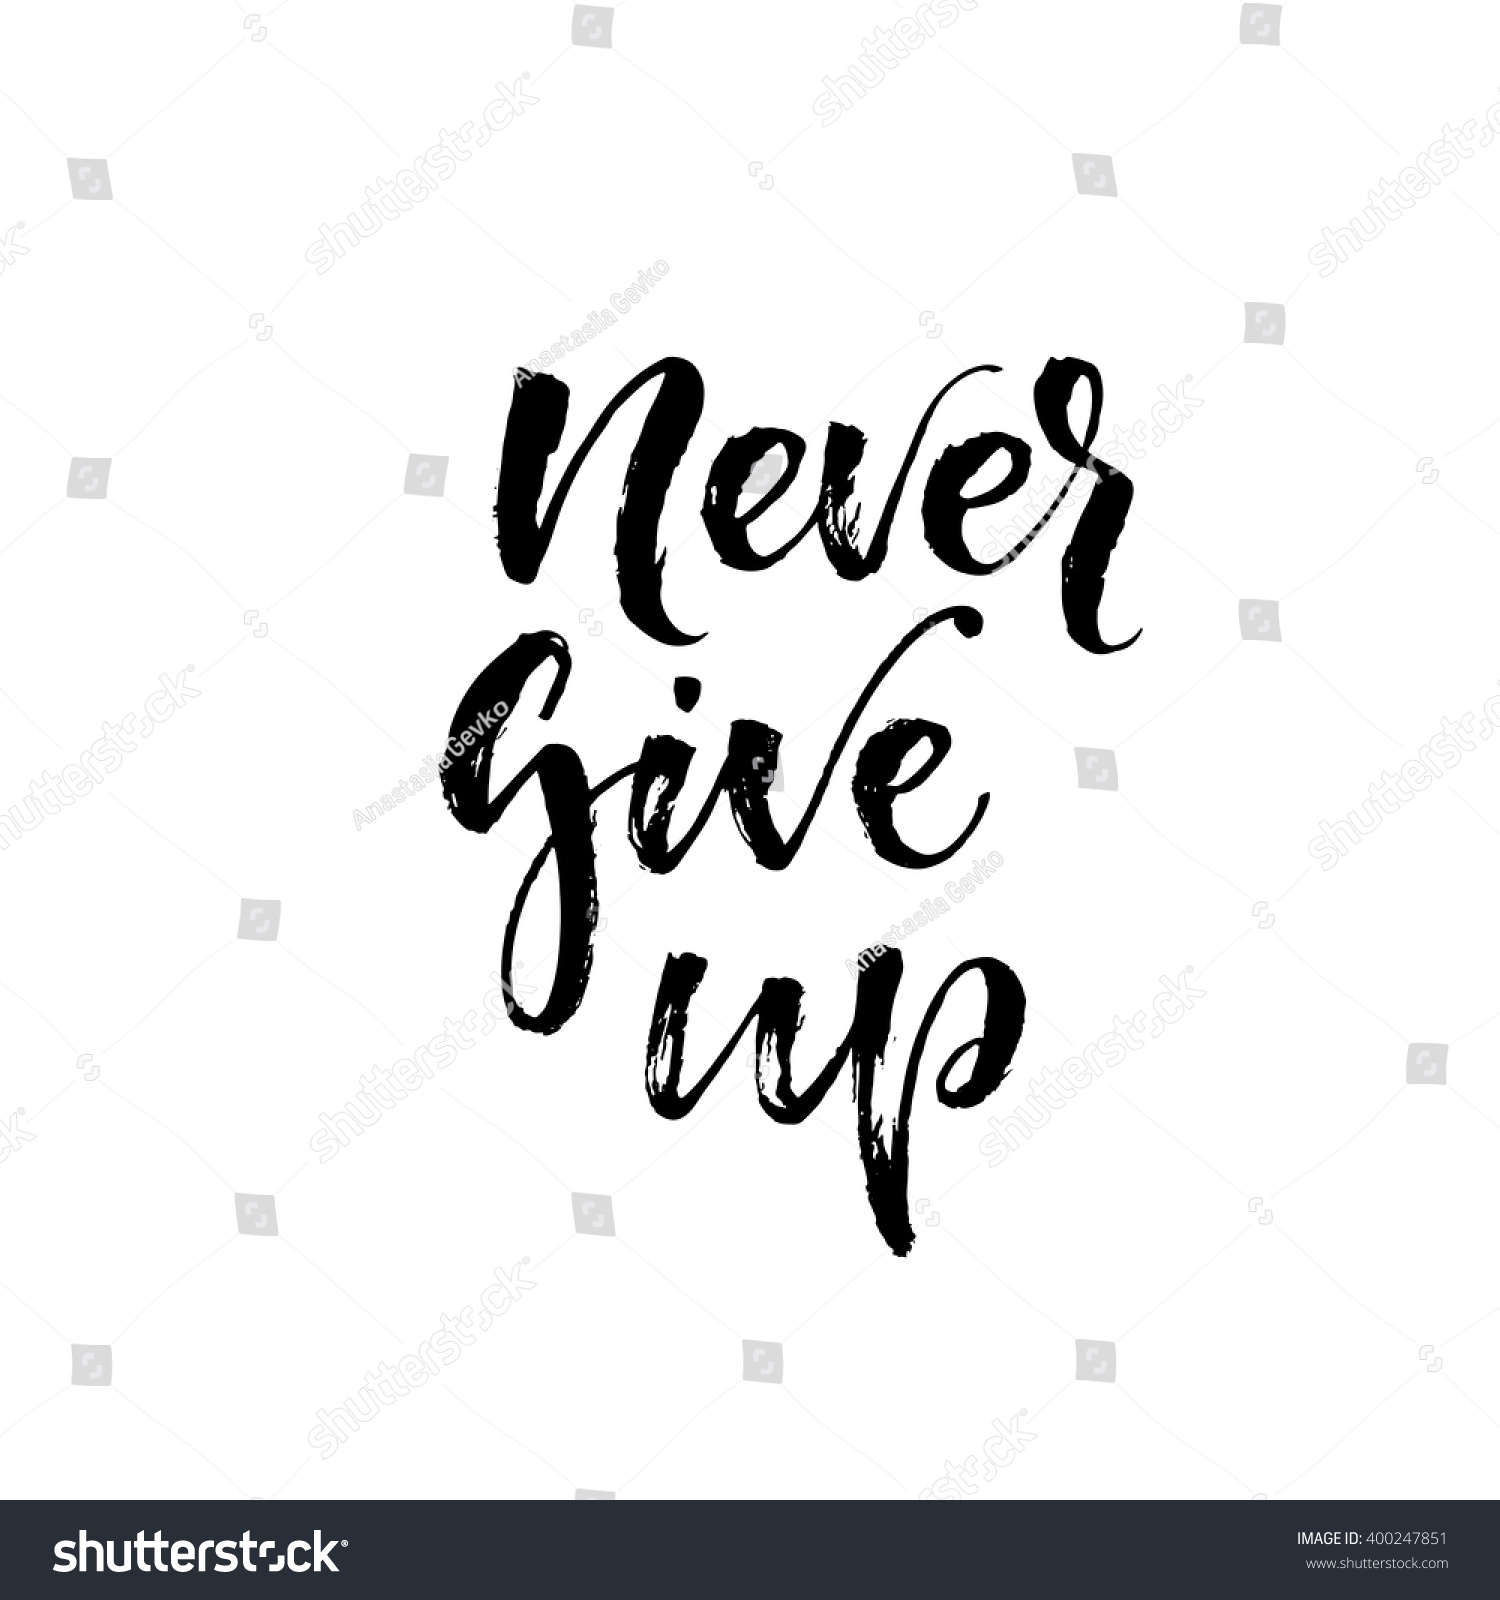 Never give up надпись